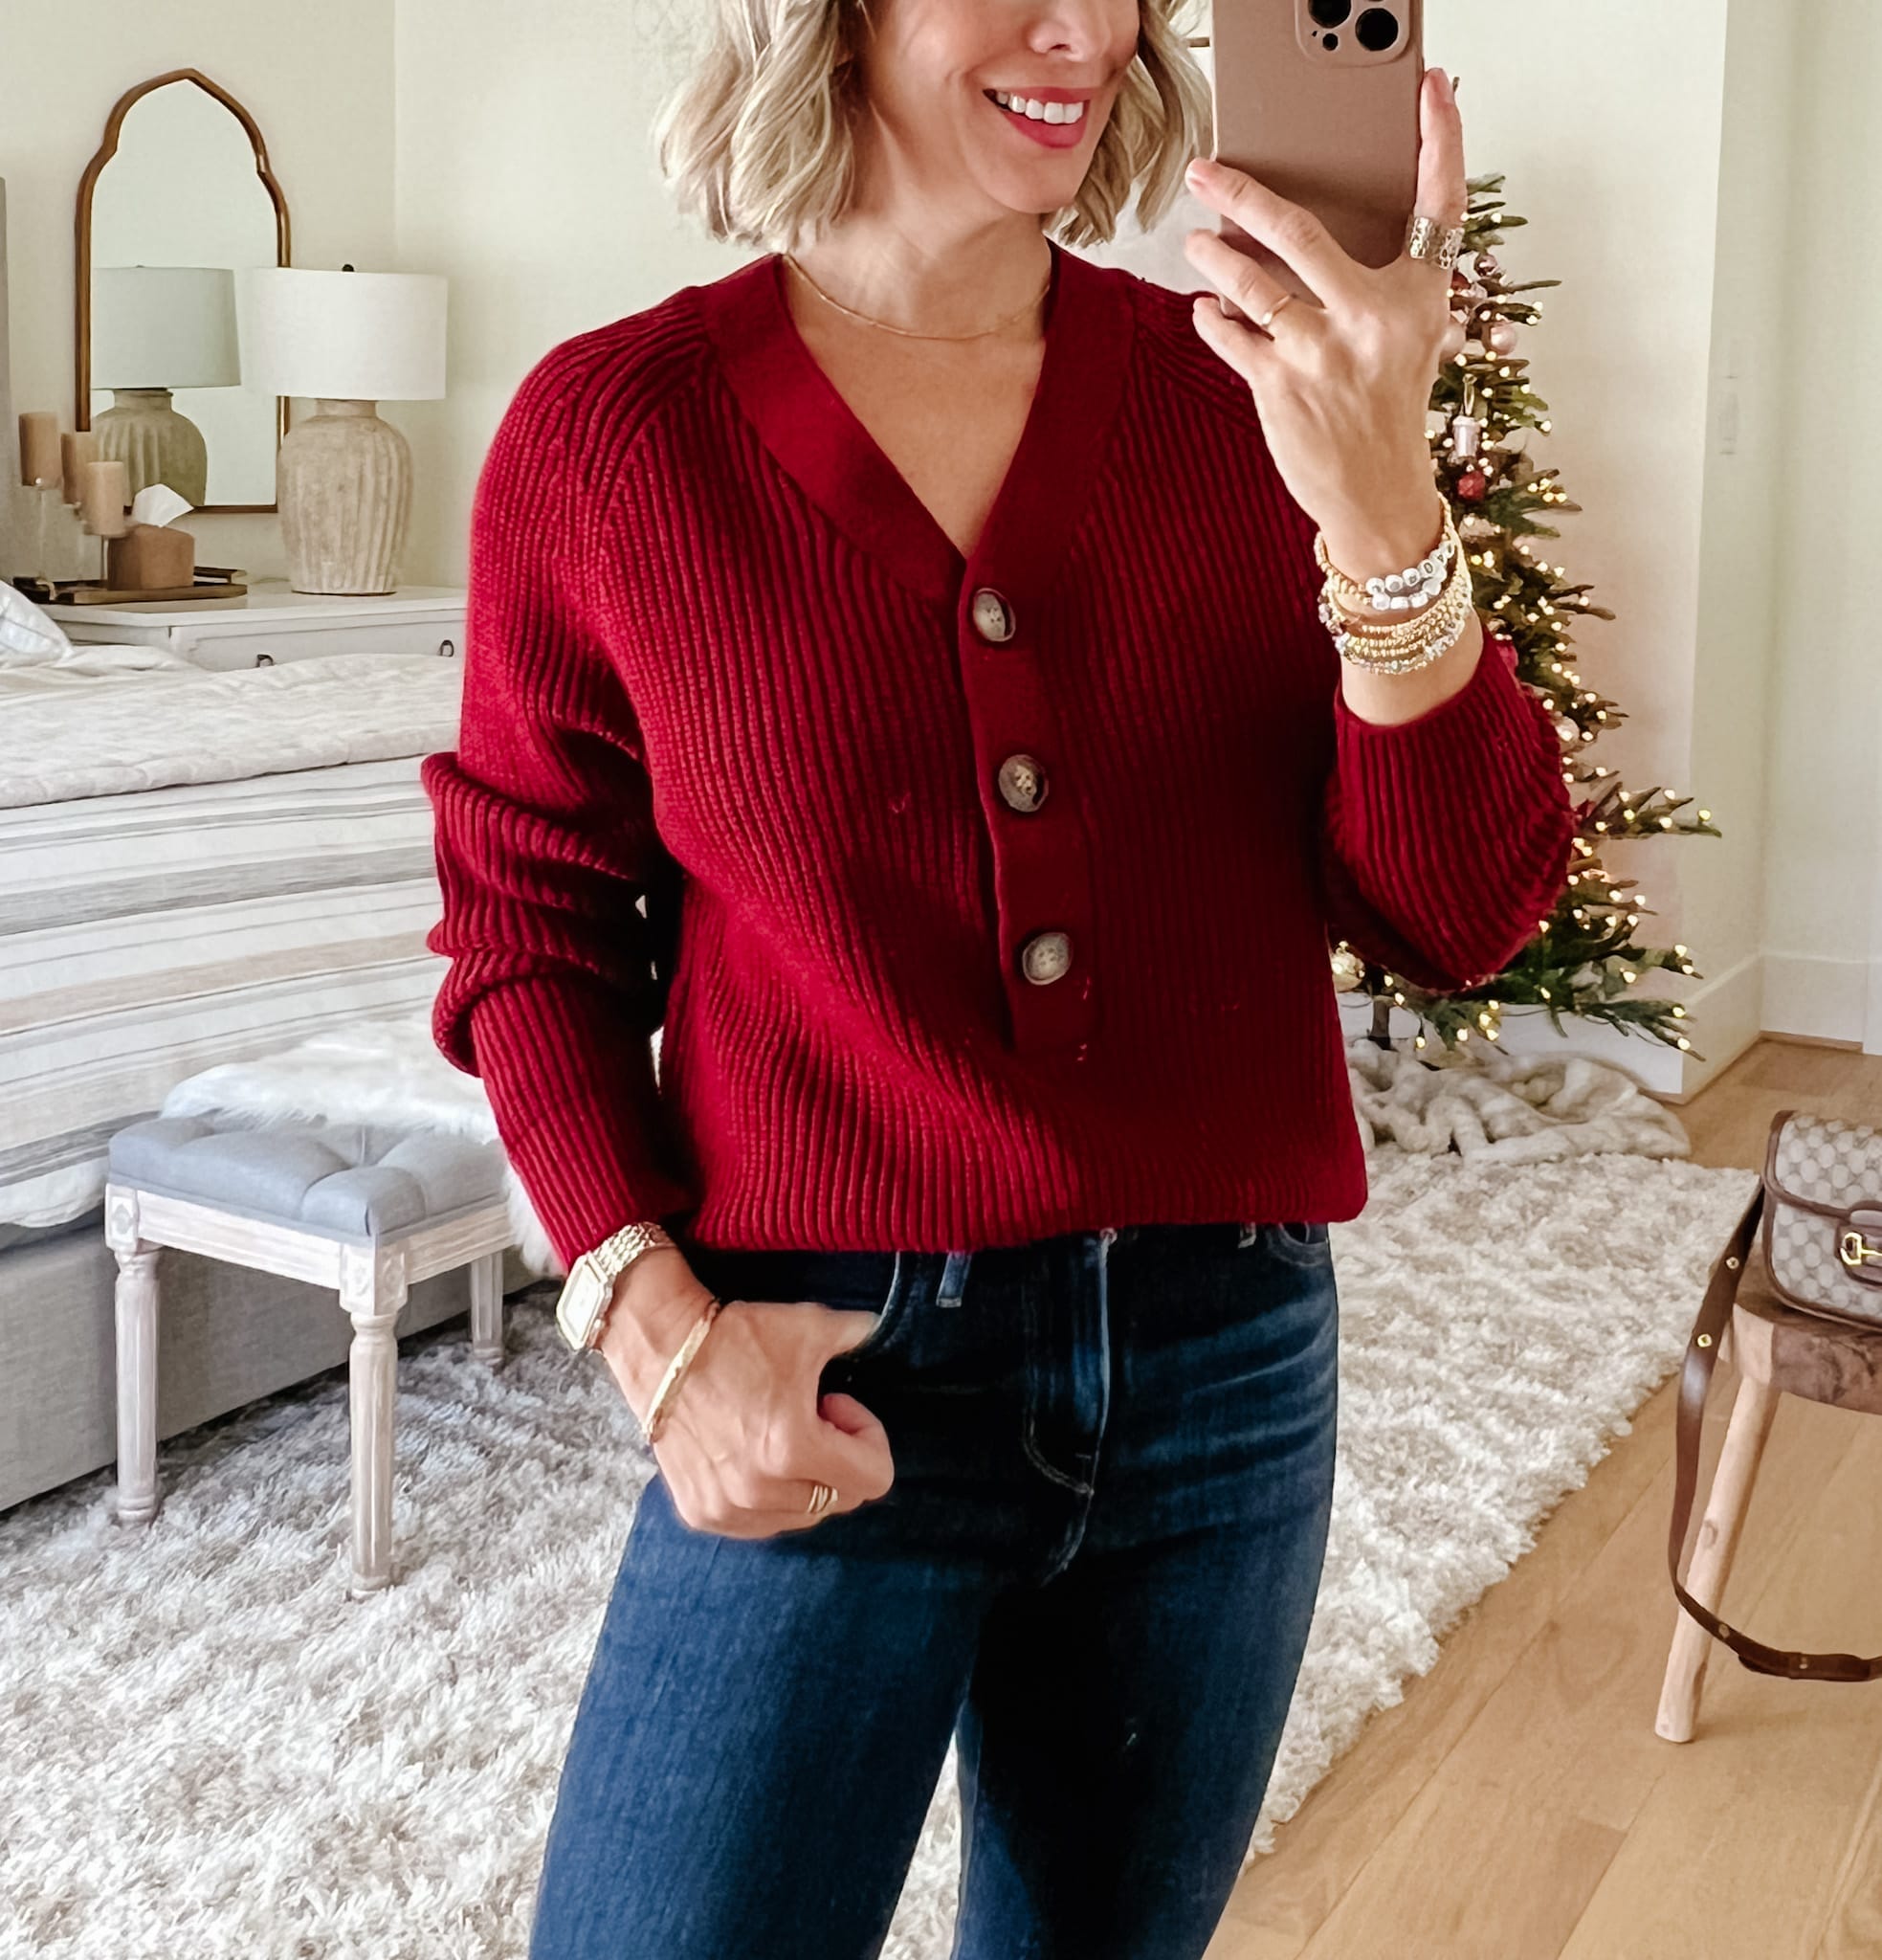 Red Henley with Large Buttons, Jeans, Booties 